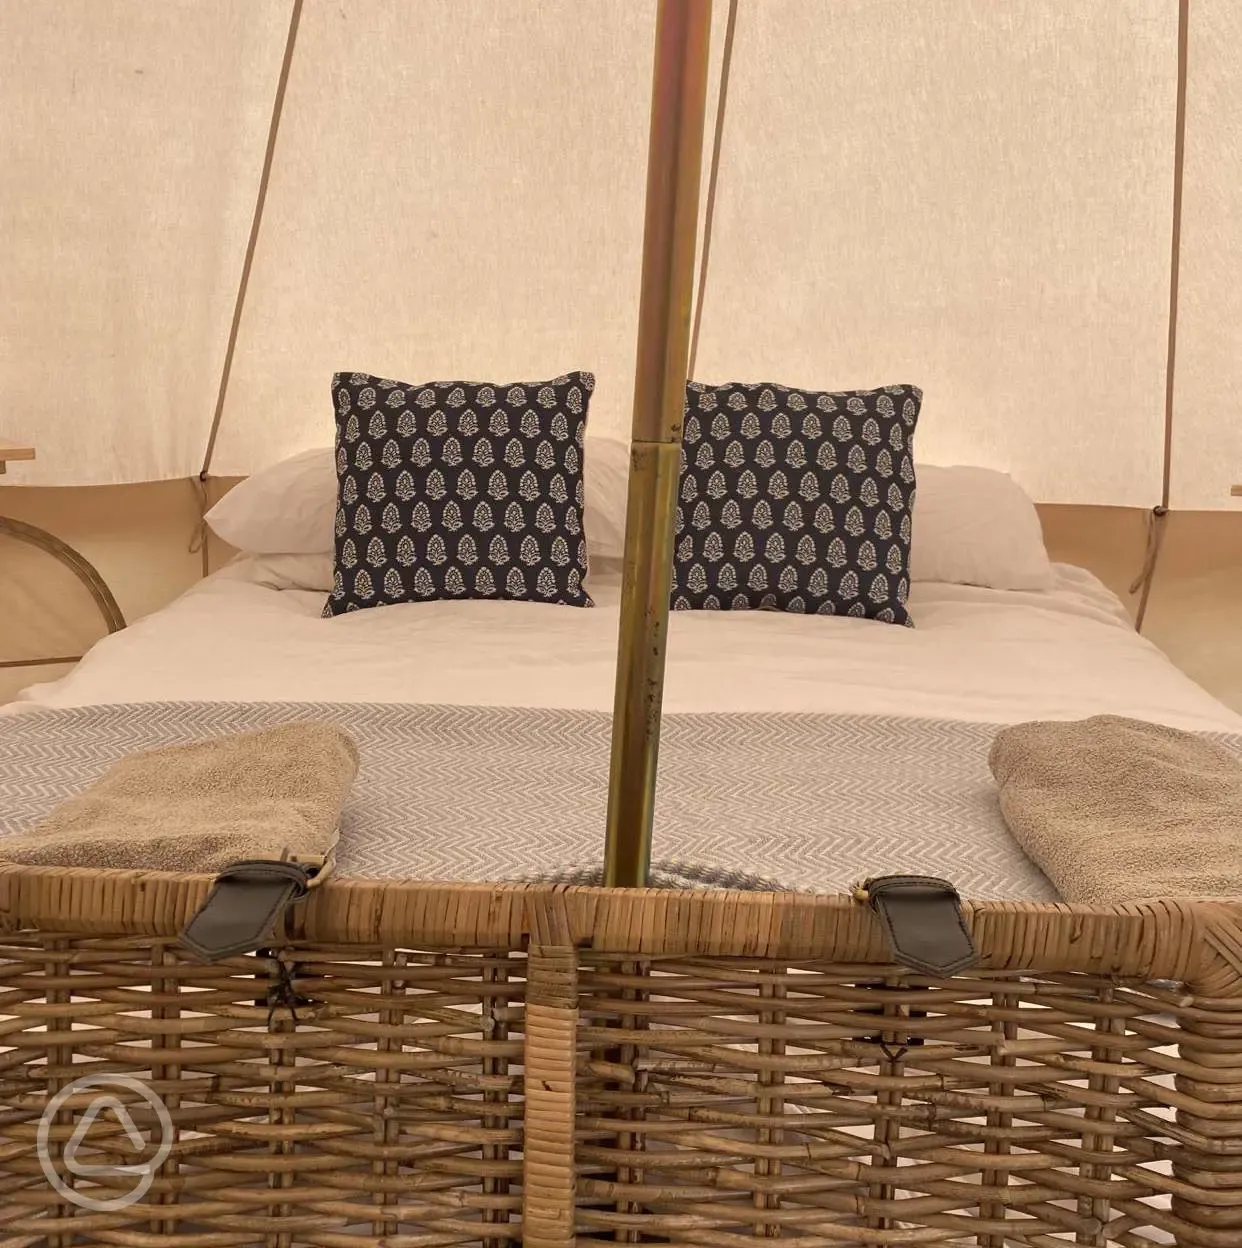 One of our bell tents Dinky Daisy